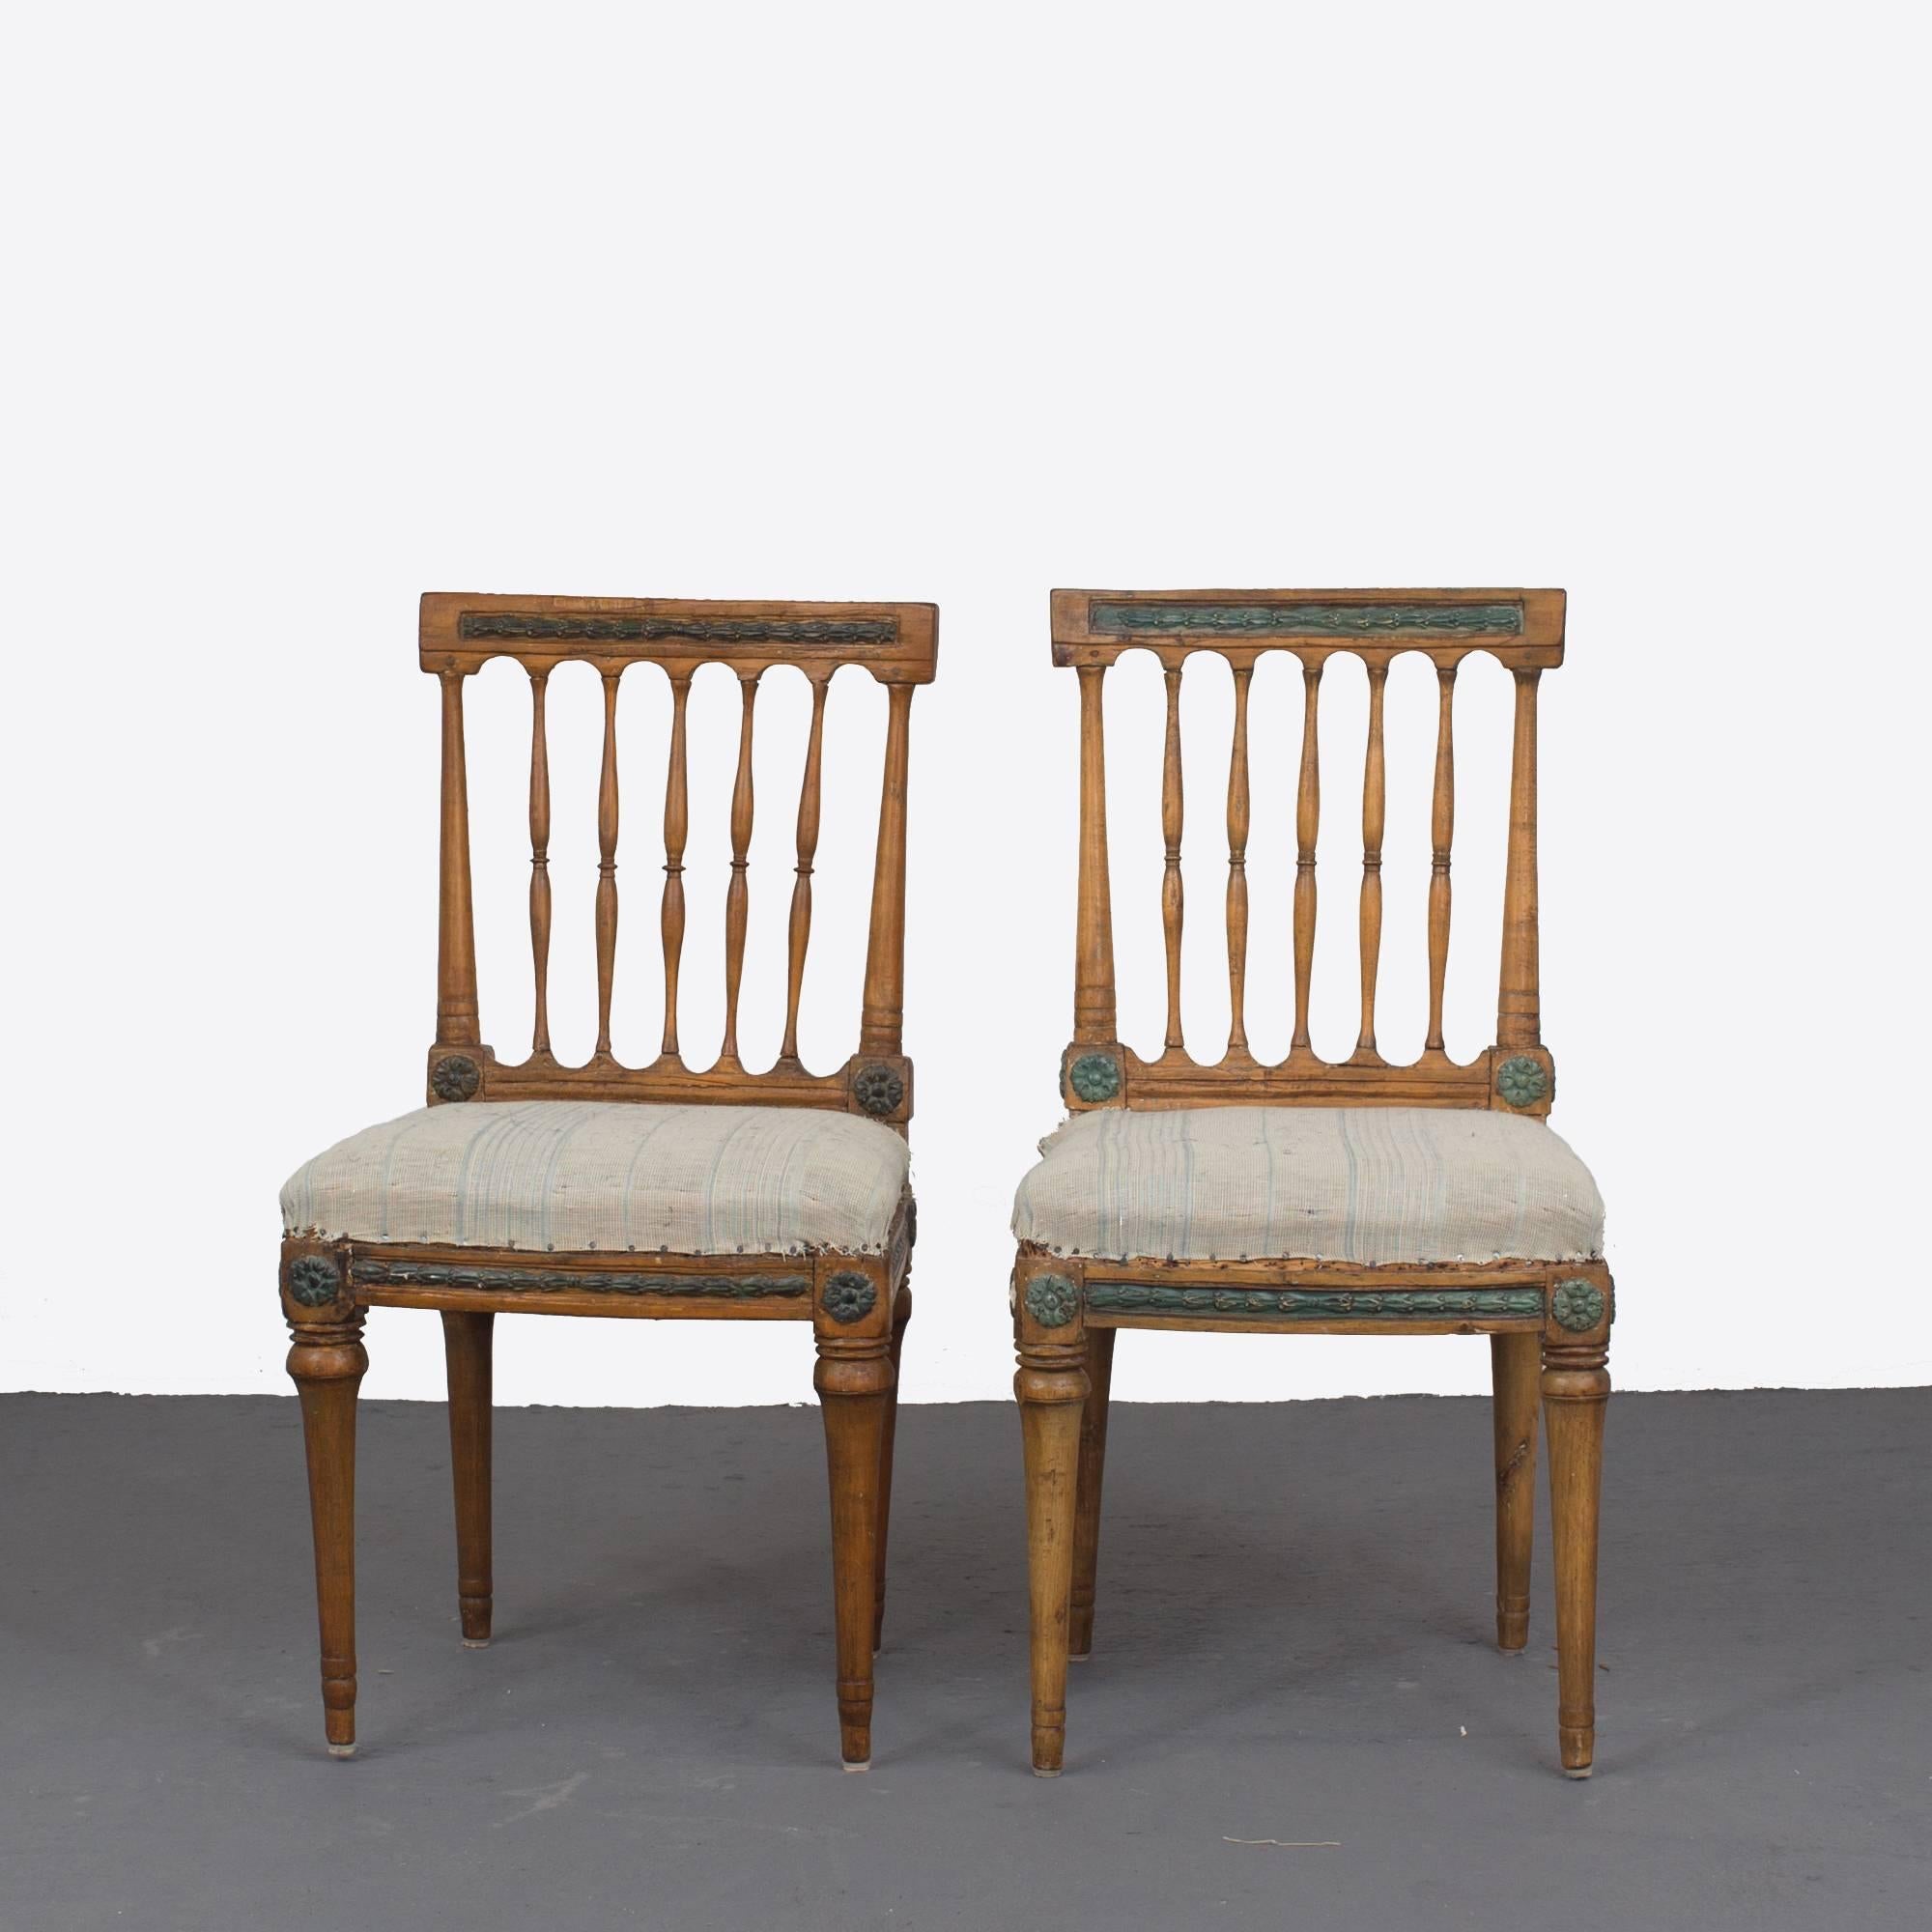 A pair of side chairs made during the Gustavian period 1790-1810. Frame made in stained wood with dark green details. Open back with five spindles and a loose cushion seat. Frieze with carved details resting on rounded channeled legs.